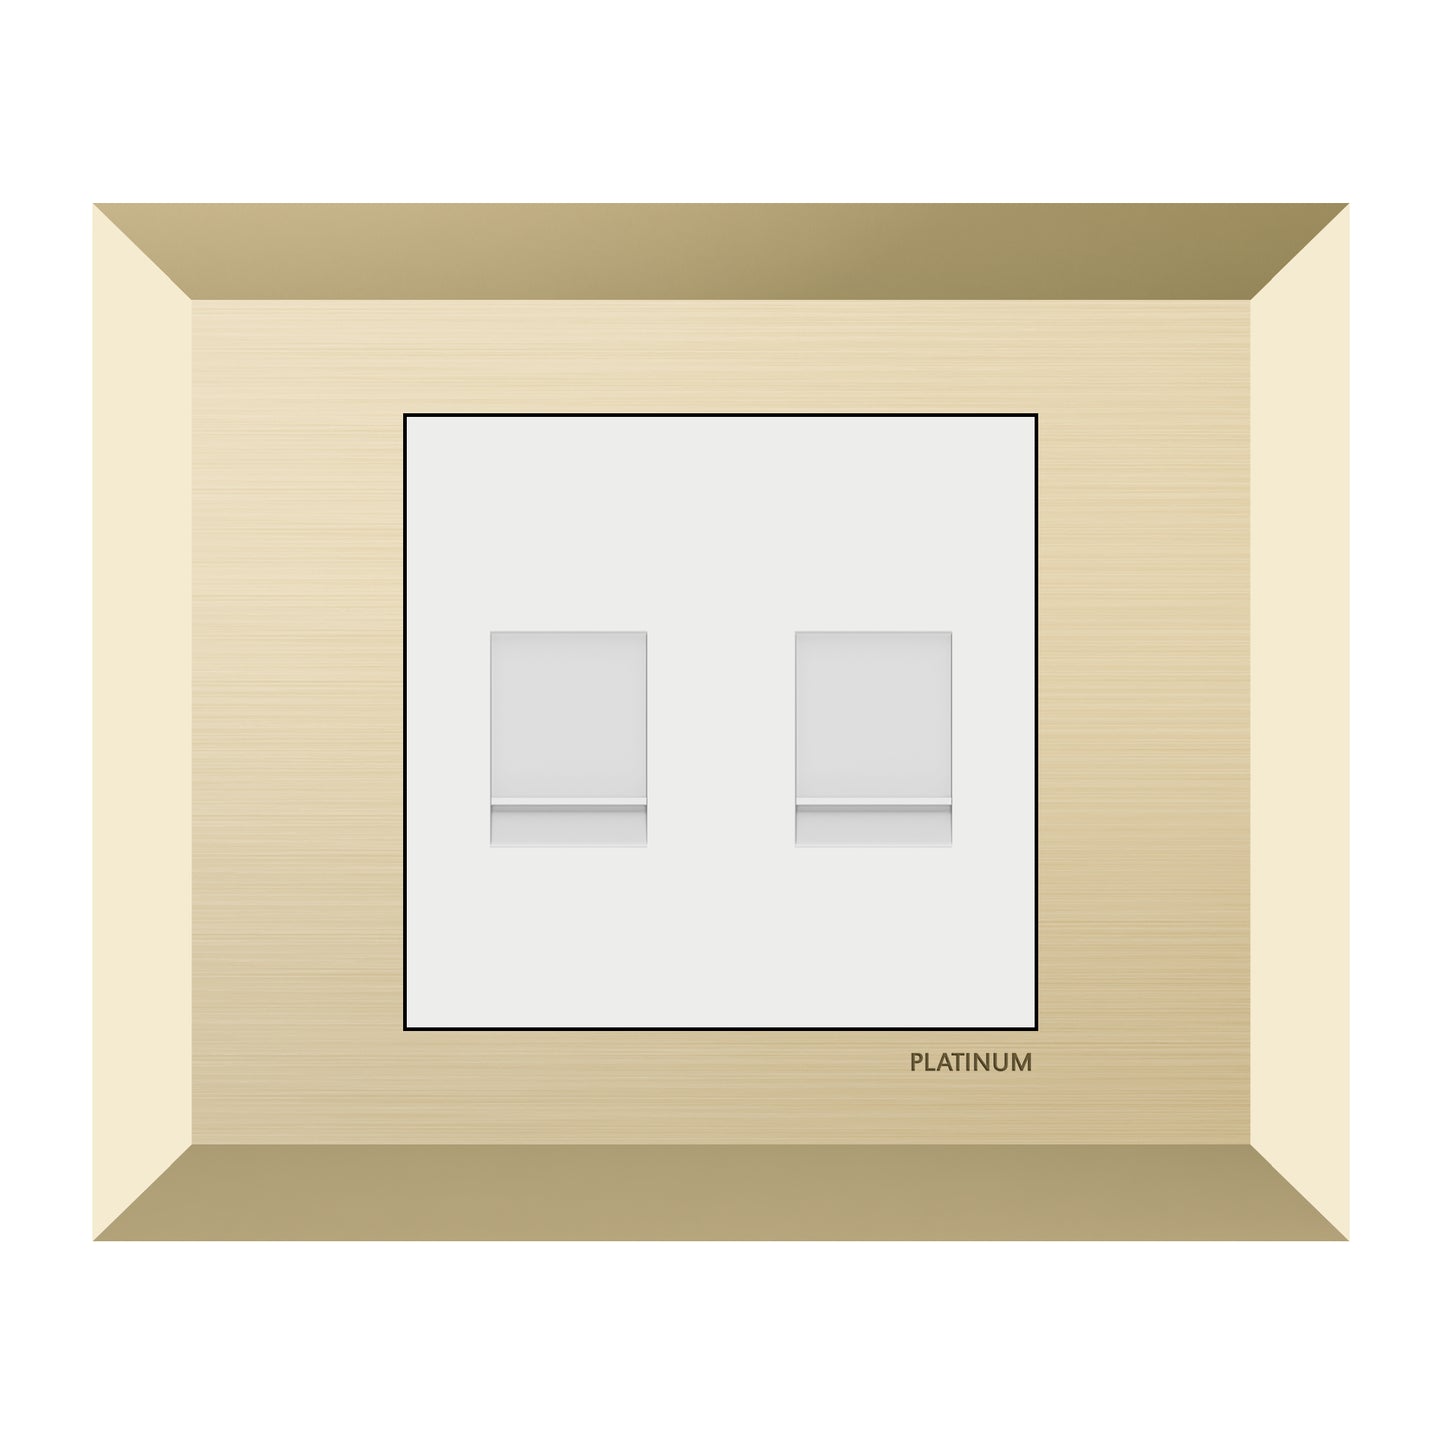 Double Tel Socket Cat3 with Plate (Platinum Electrical Wiring Devices)